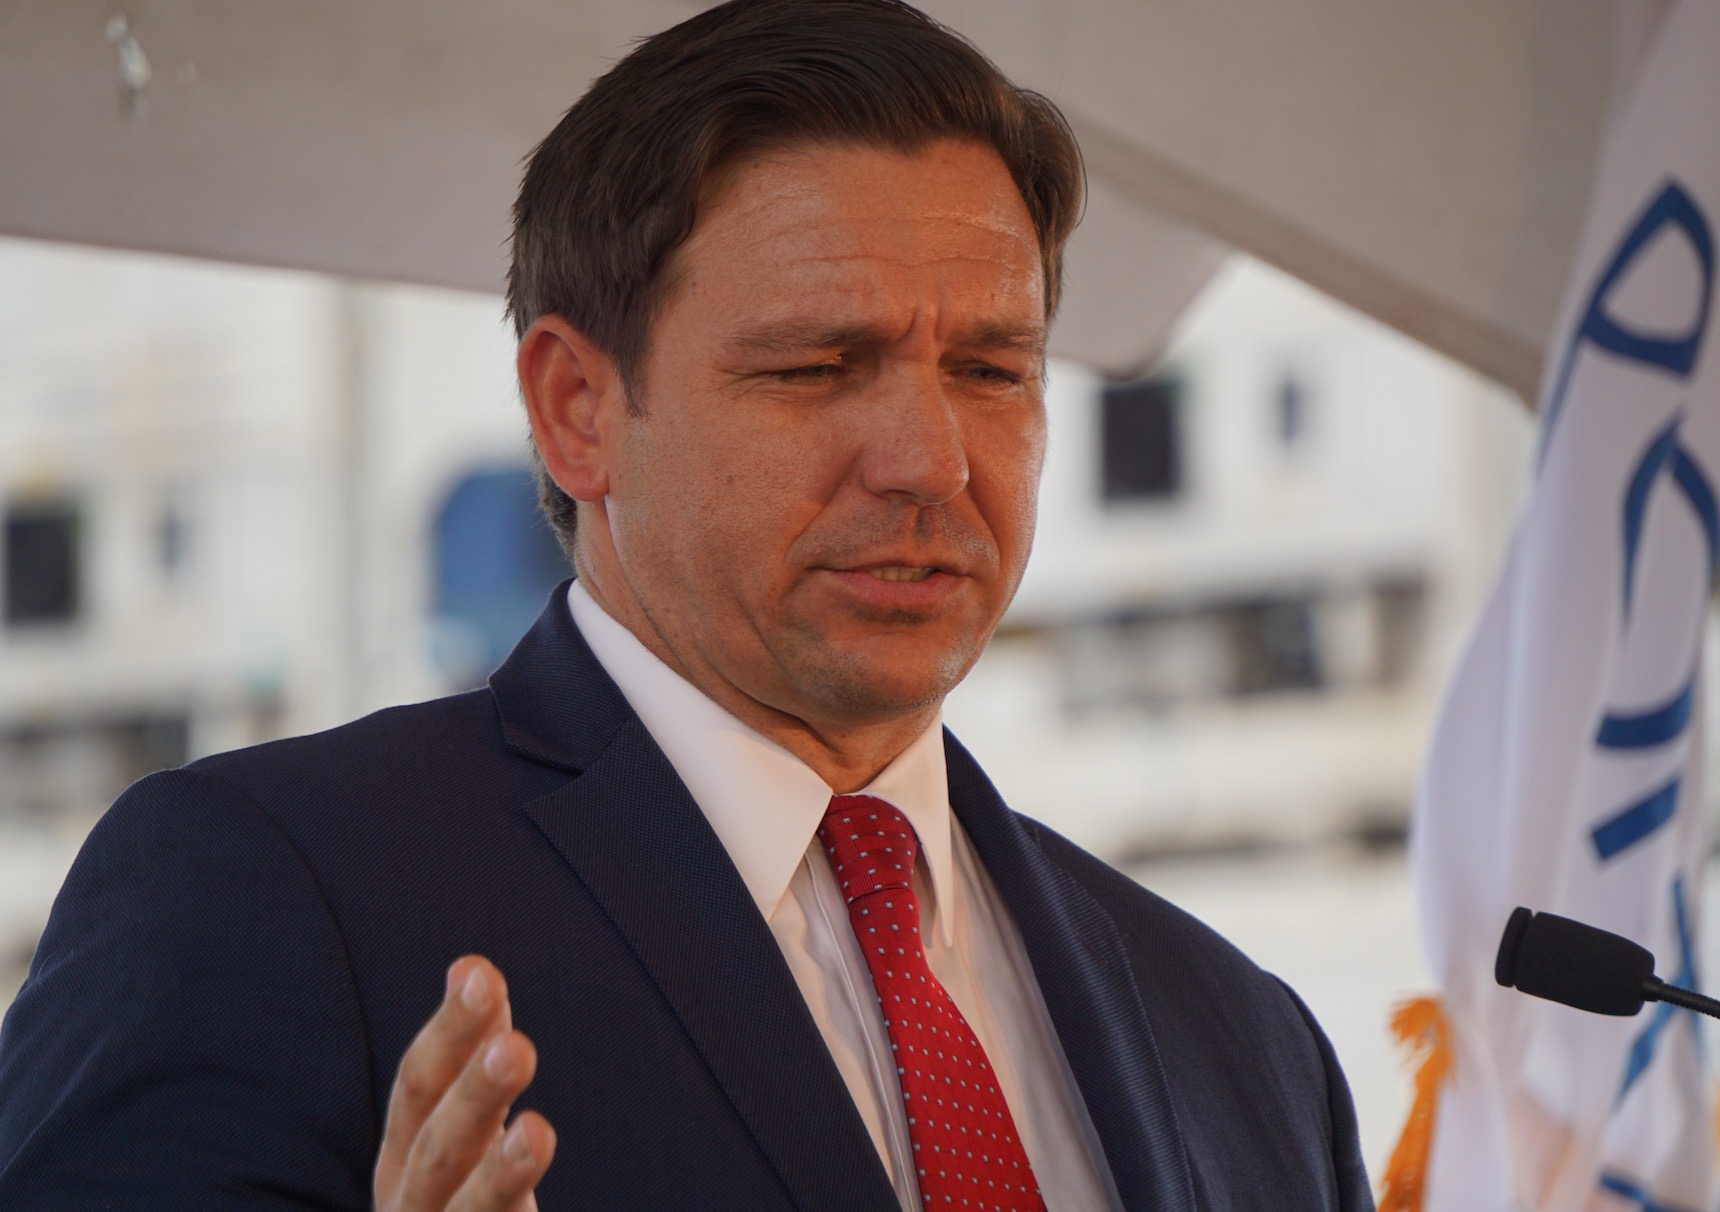 Fried refused to acknowledge DeSantis' successful COVID vaccine roll out